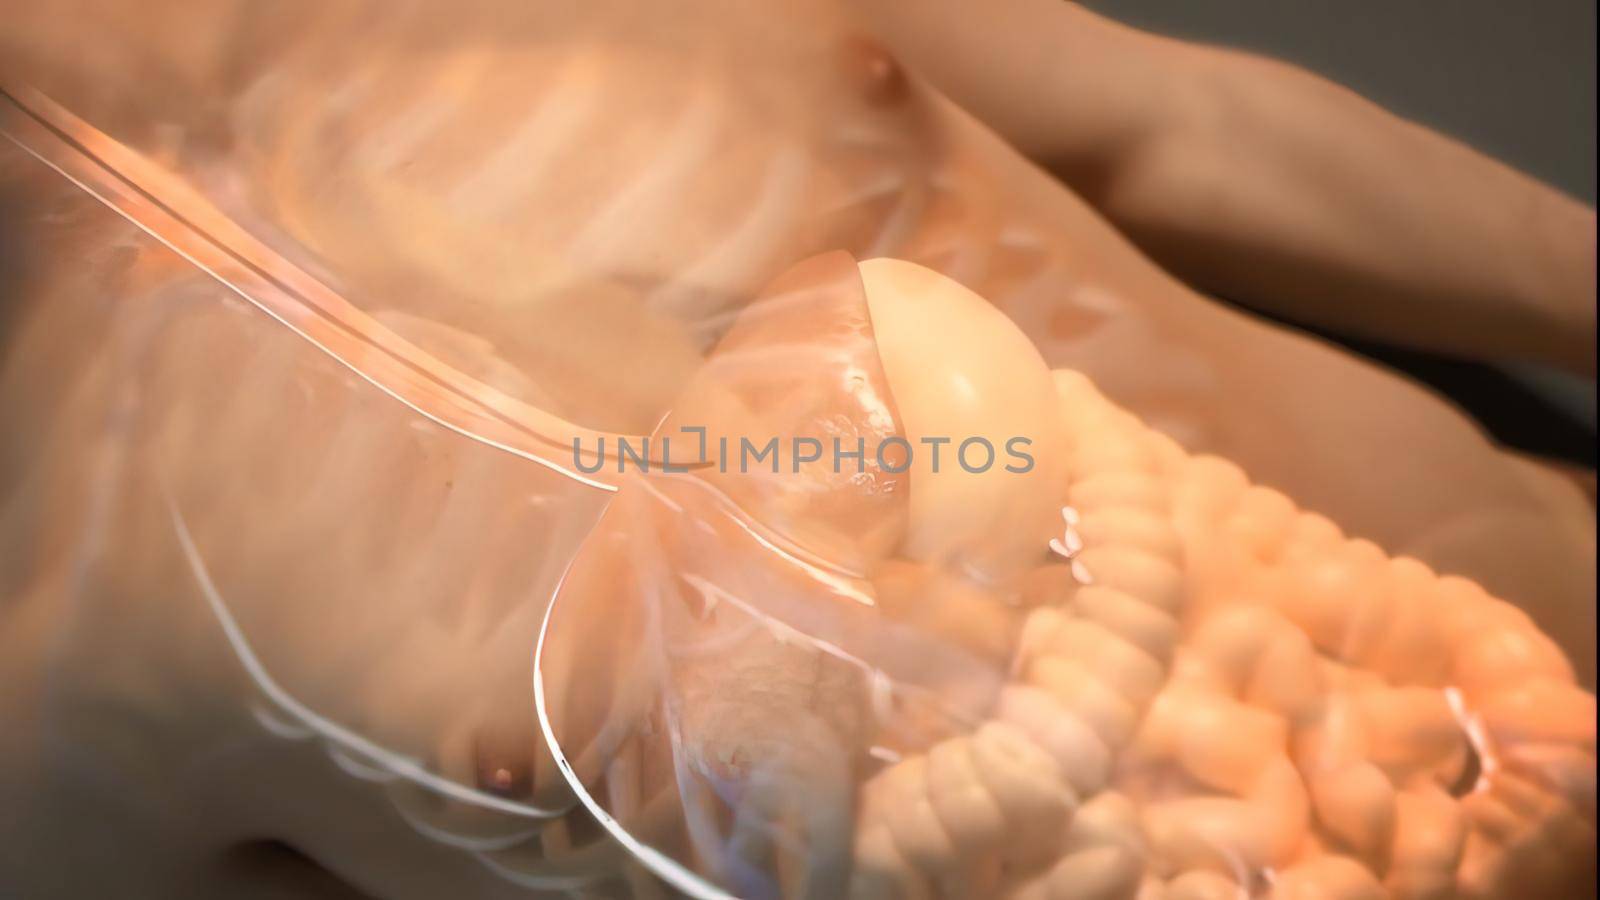 3D illustration Of The Human Internal Organ by creativepic